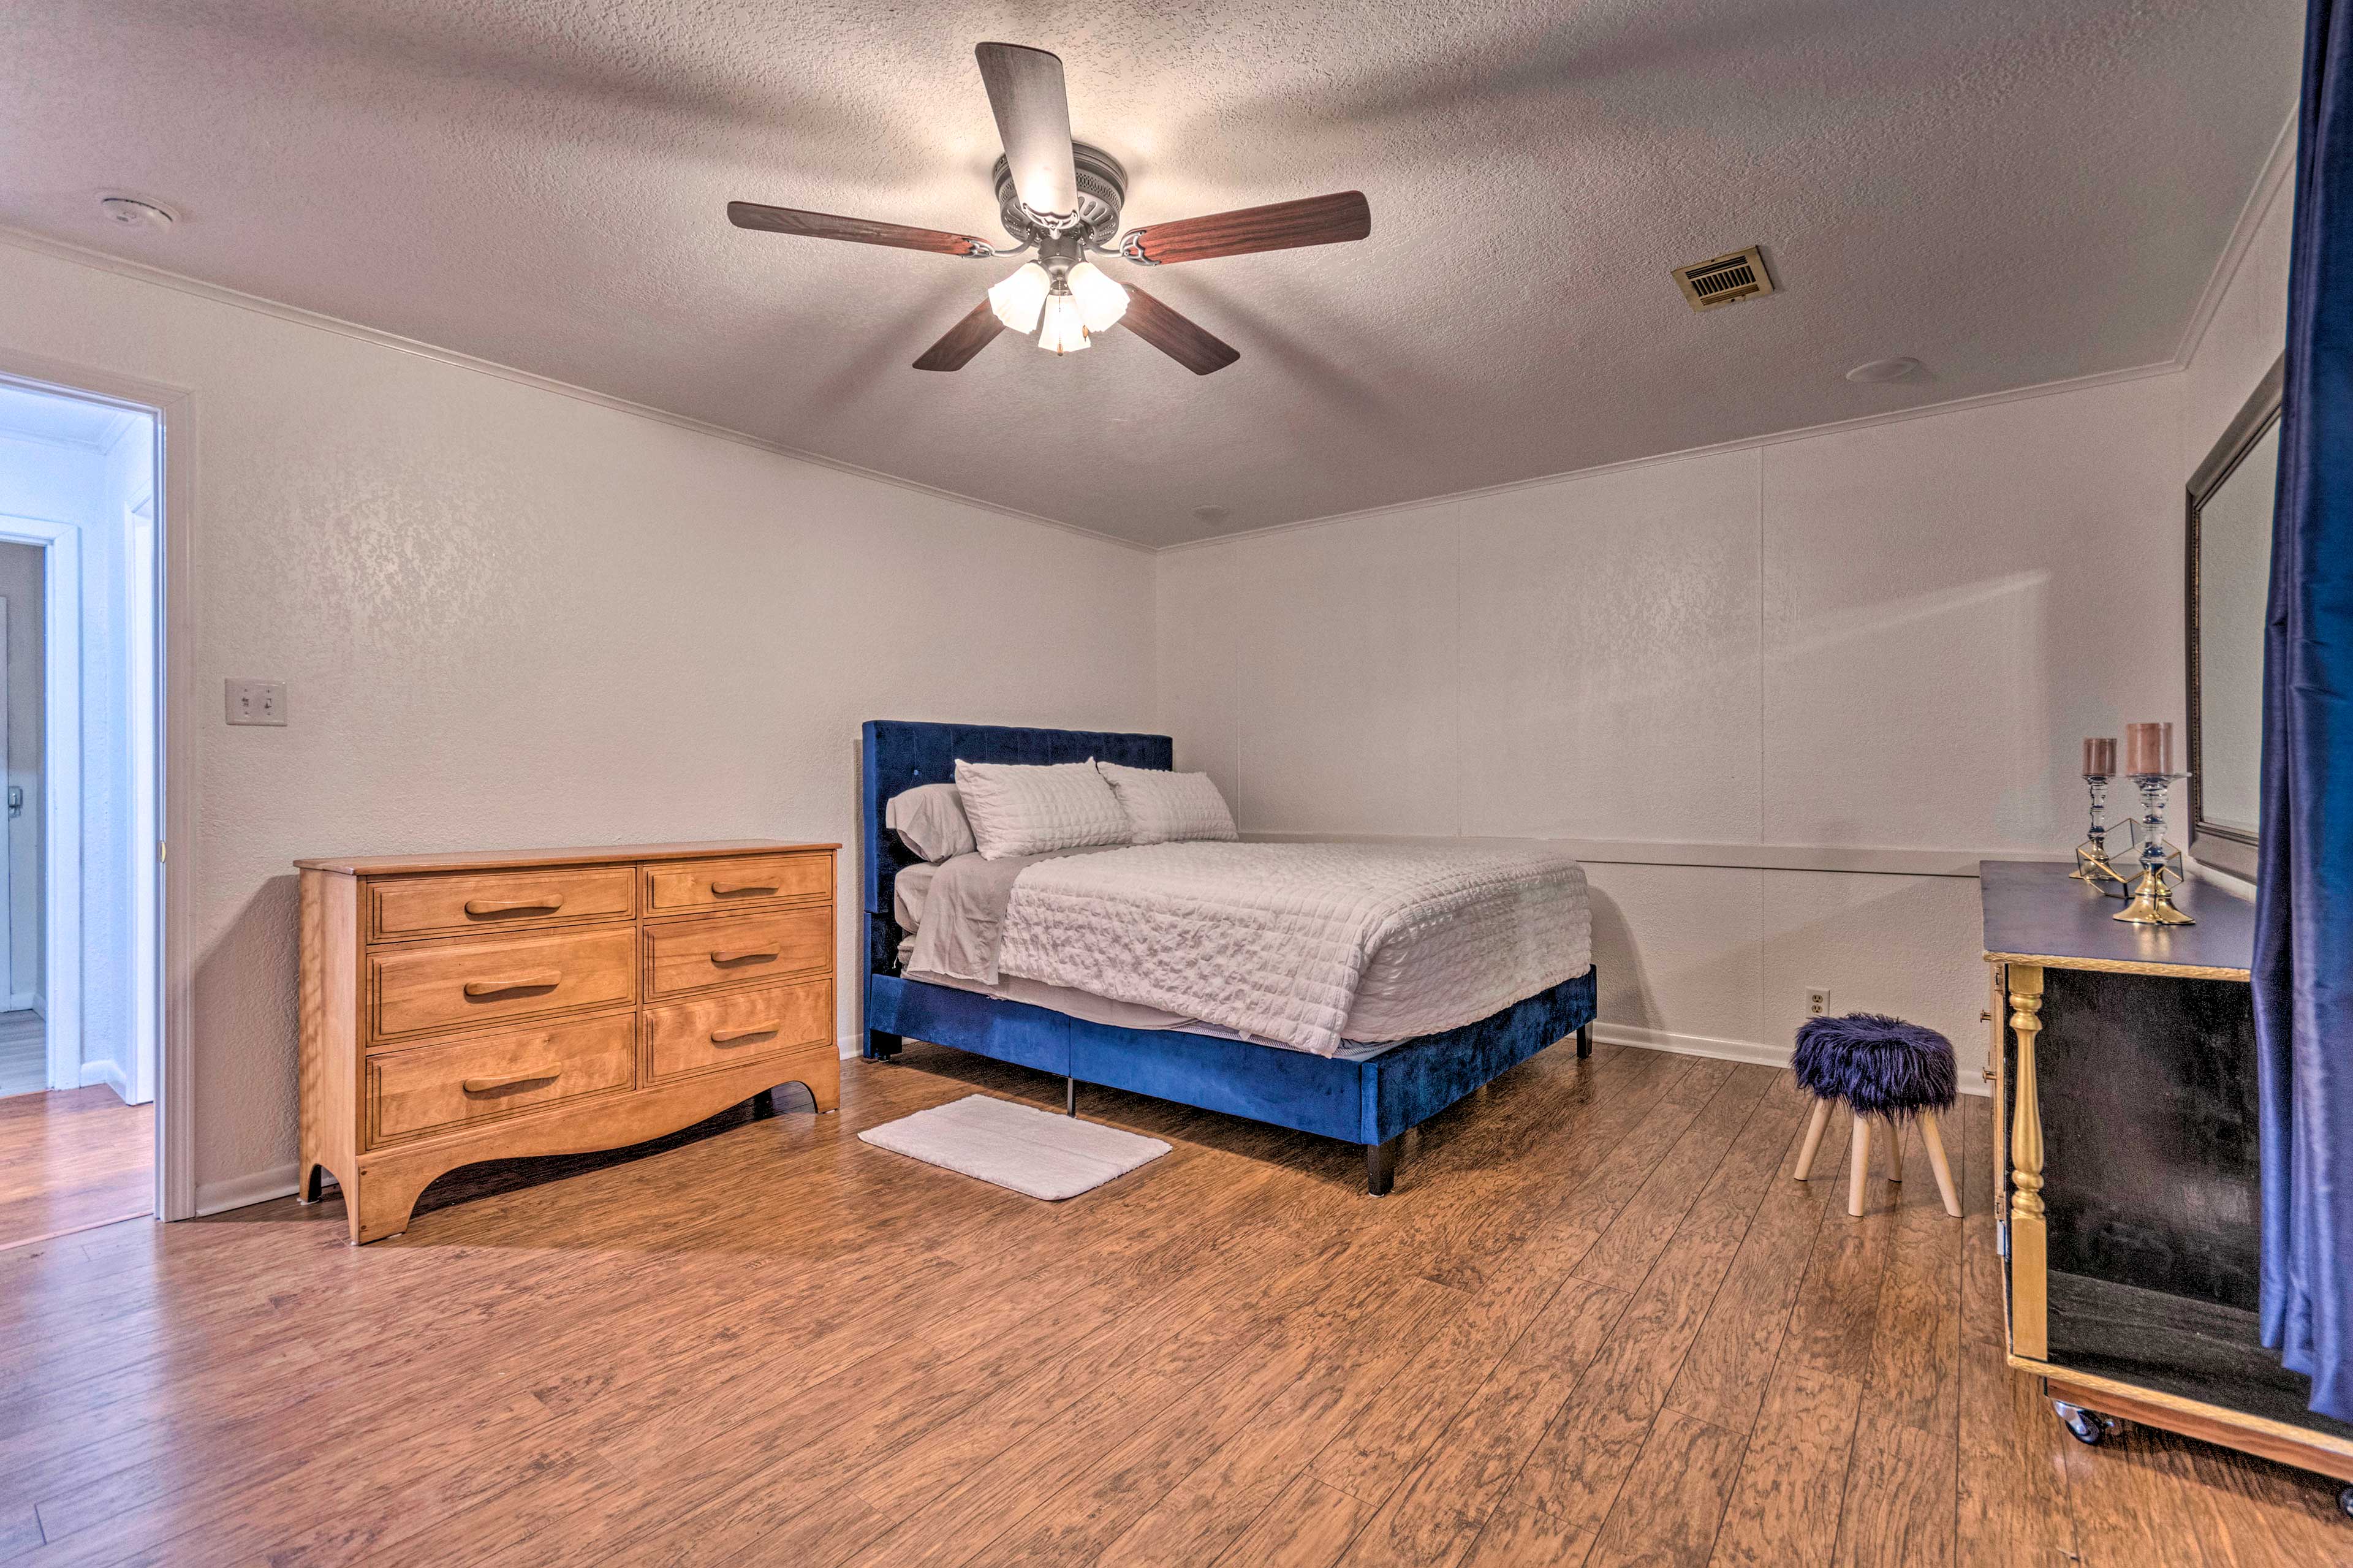 You'll find a queen bed in this room.